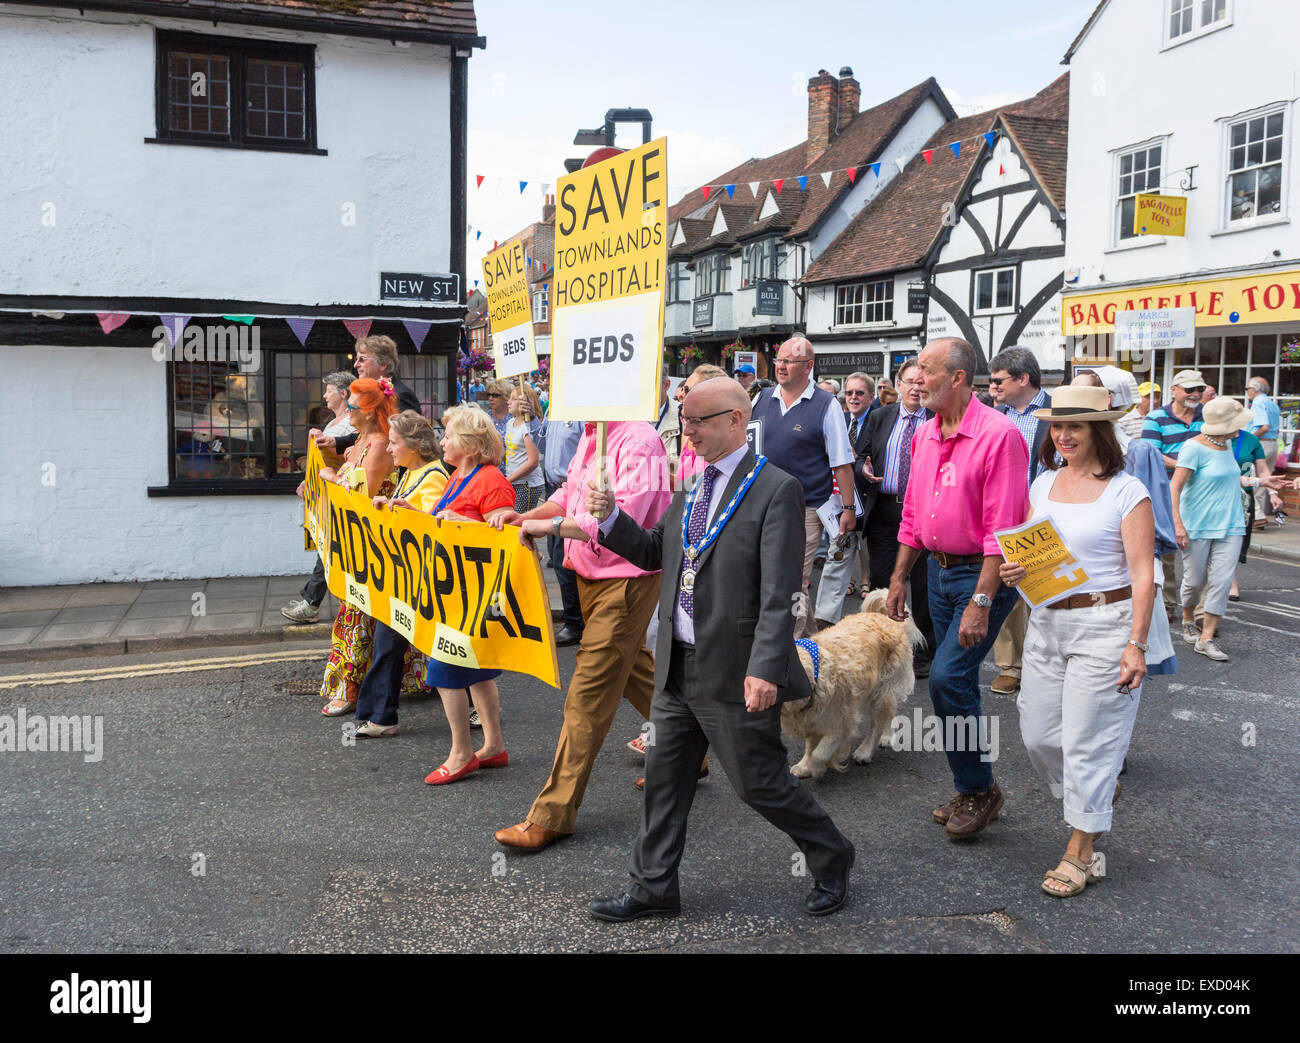 Henley-on-Thames, UK. 11th July, 2015. South Oxfordshire District Councillor Paul Harrison holds aloft a placard as he leads a large crowd of campaigners, including Henley's Mayor Lorraine Hillier, in a peaceful protest march in Henley-on-Thames, Oxfordshire, England, on Saturday 11 July 2015 against the Oxfordshire Clinical Commissioning Group's plans for its new health campus, Townlands Hospital.  The new hospital was originally planned to have 18 beds, now changed to 5 beds in a care home to be built next to the hospital Credit:  Graham Prentice/Alamy Live News Stock Photo